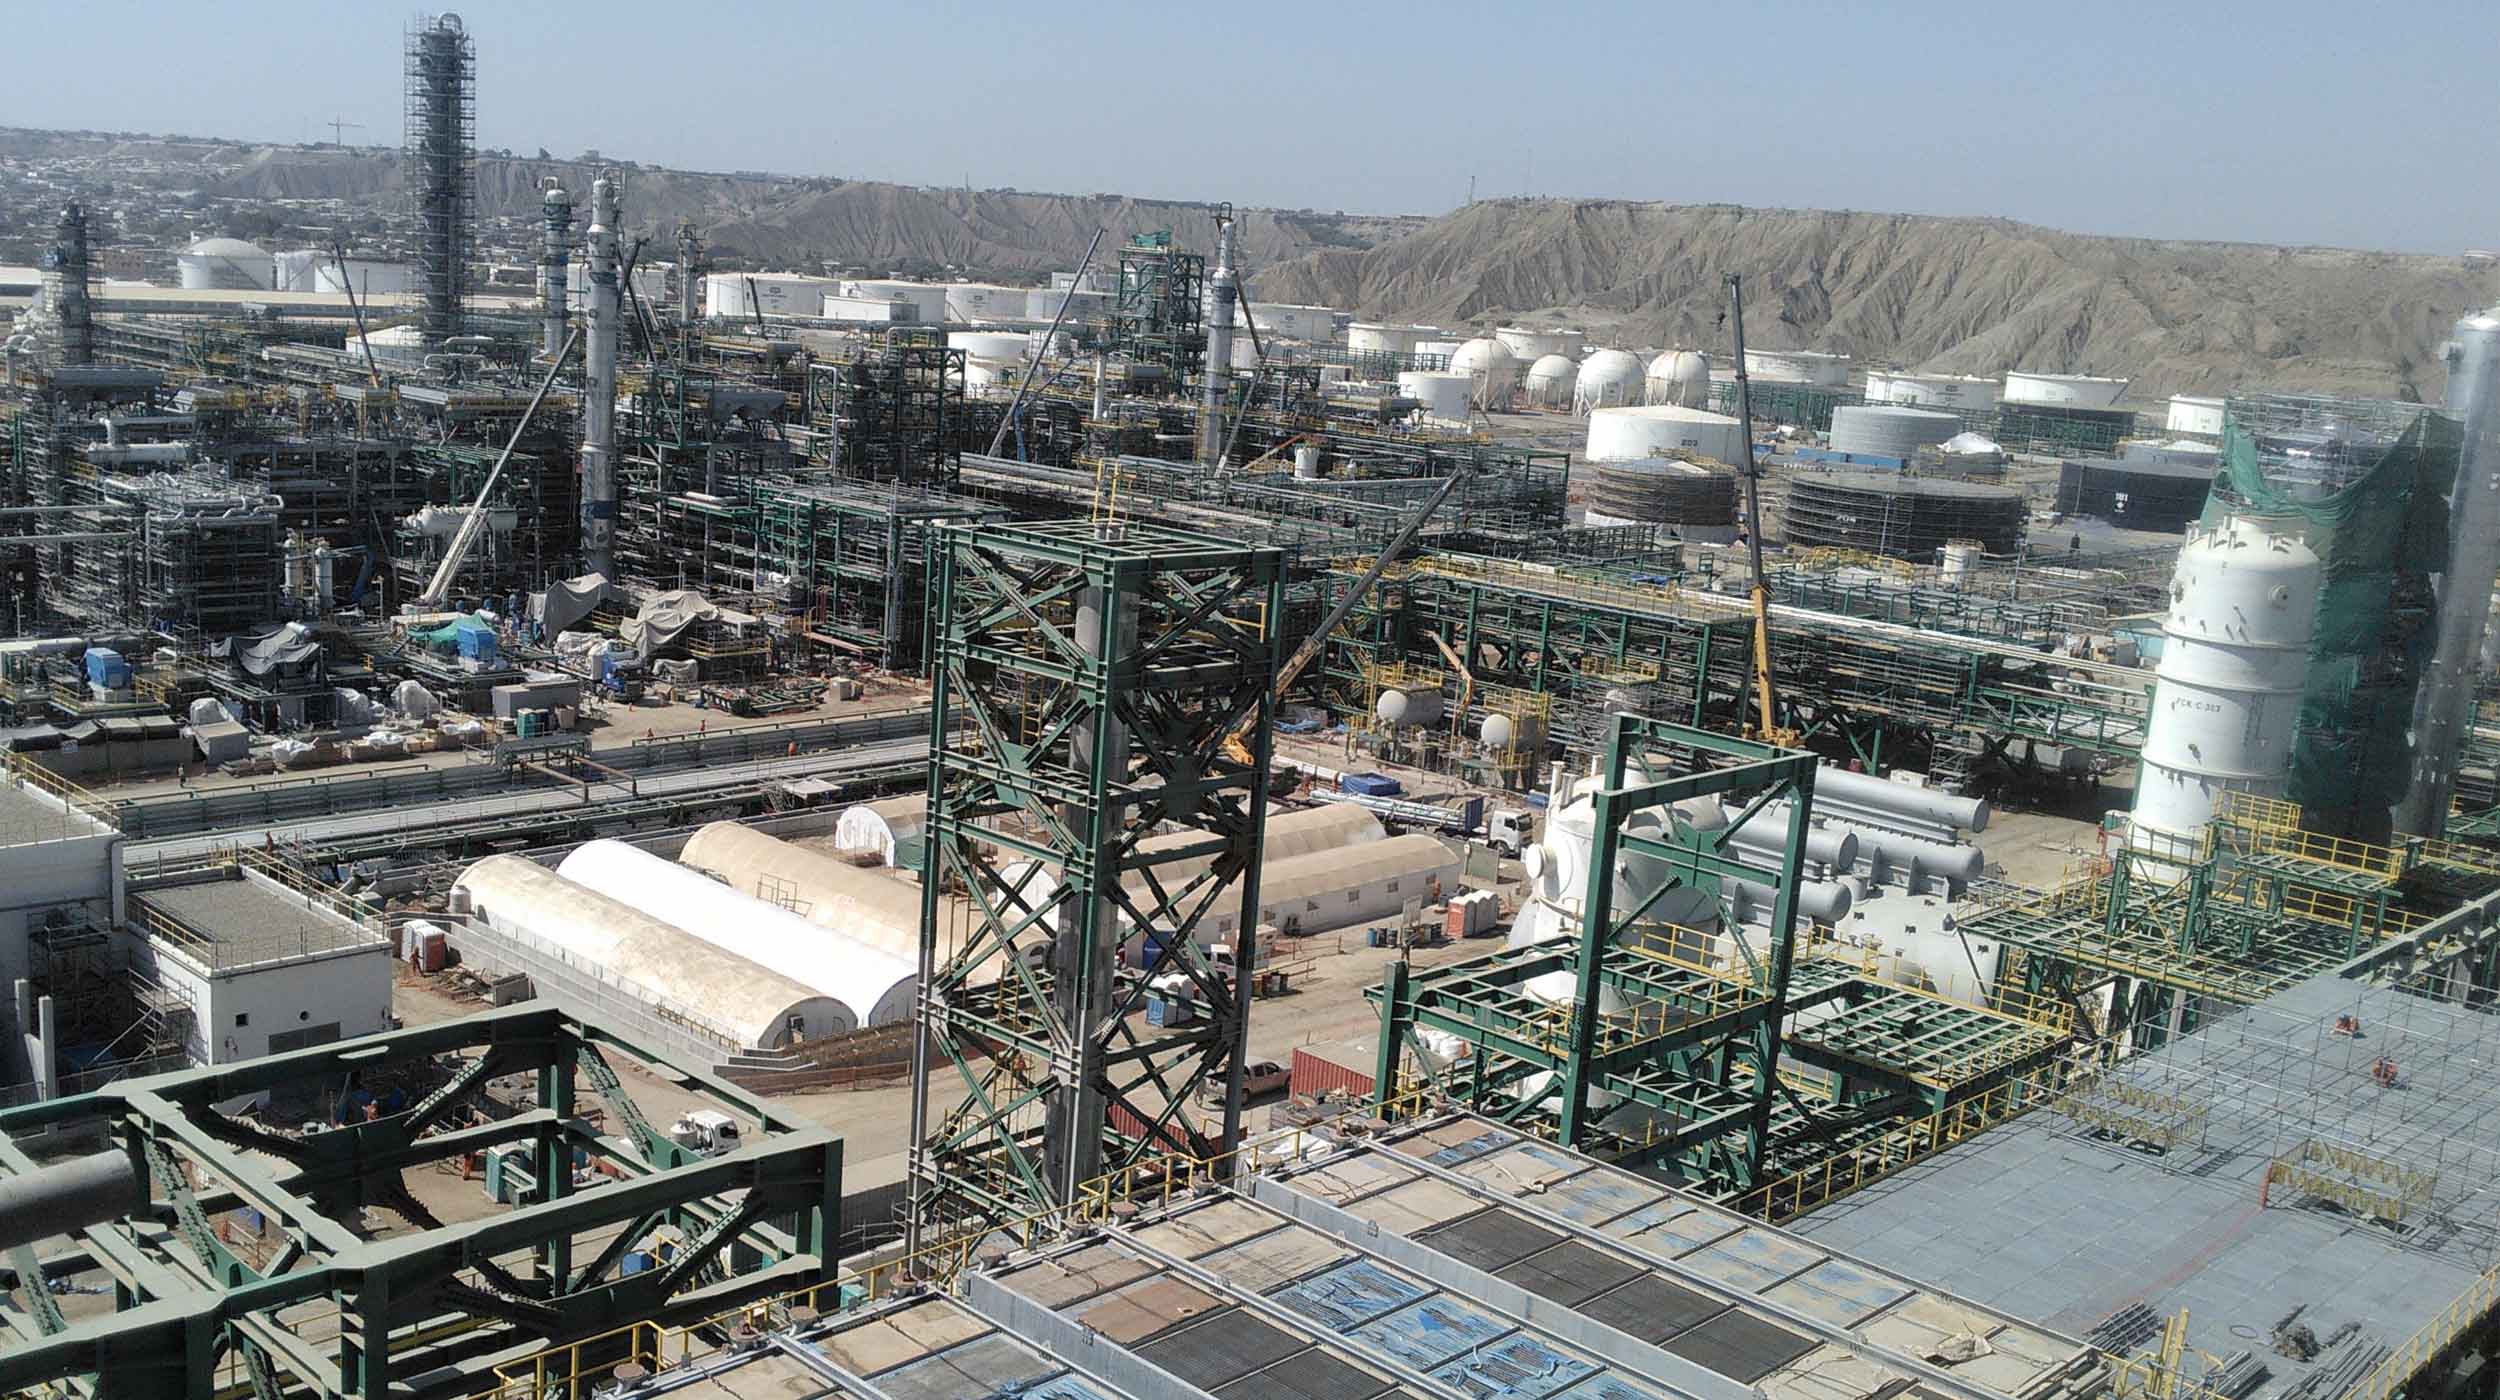 The Modernisation Project for the Talara Refinery envisions the creation of new productive units and the implementation of new systems and procedures.